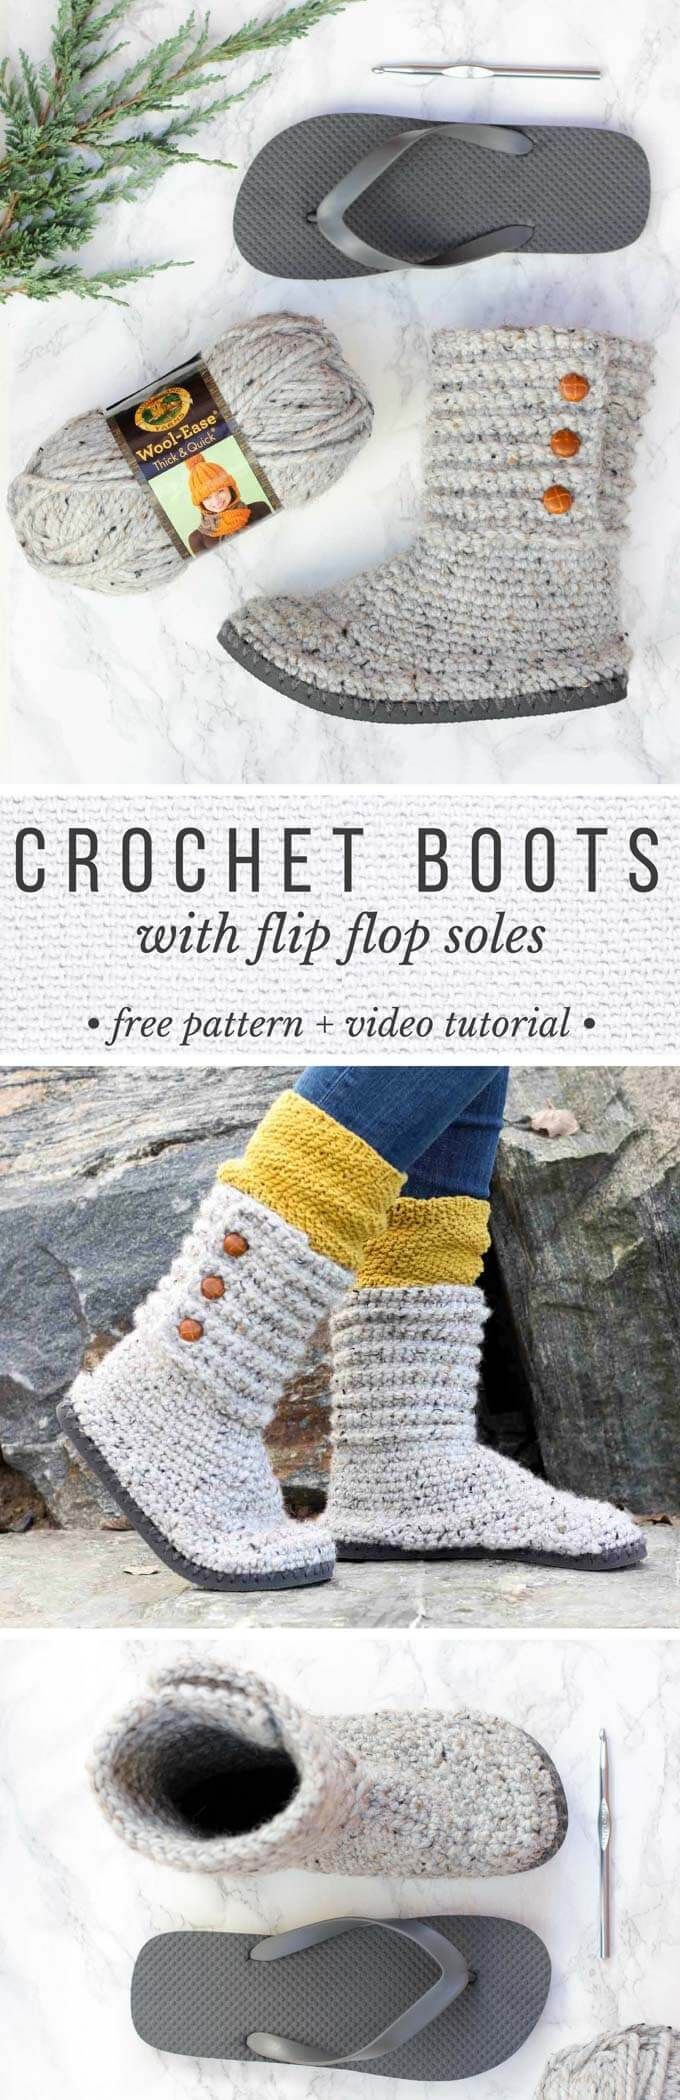 These DIY crochet boots with flip flops for soles make excellent slippers or UGG-l